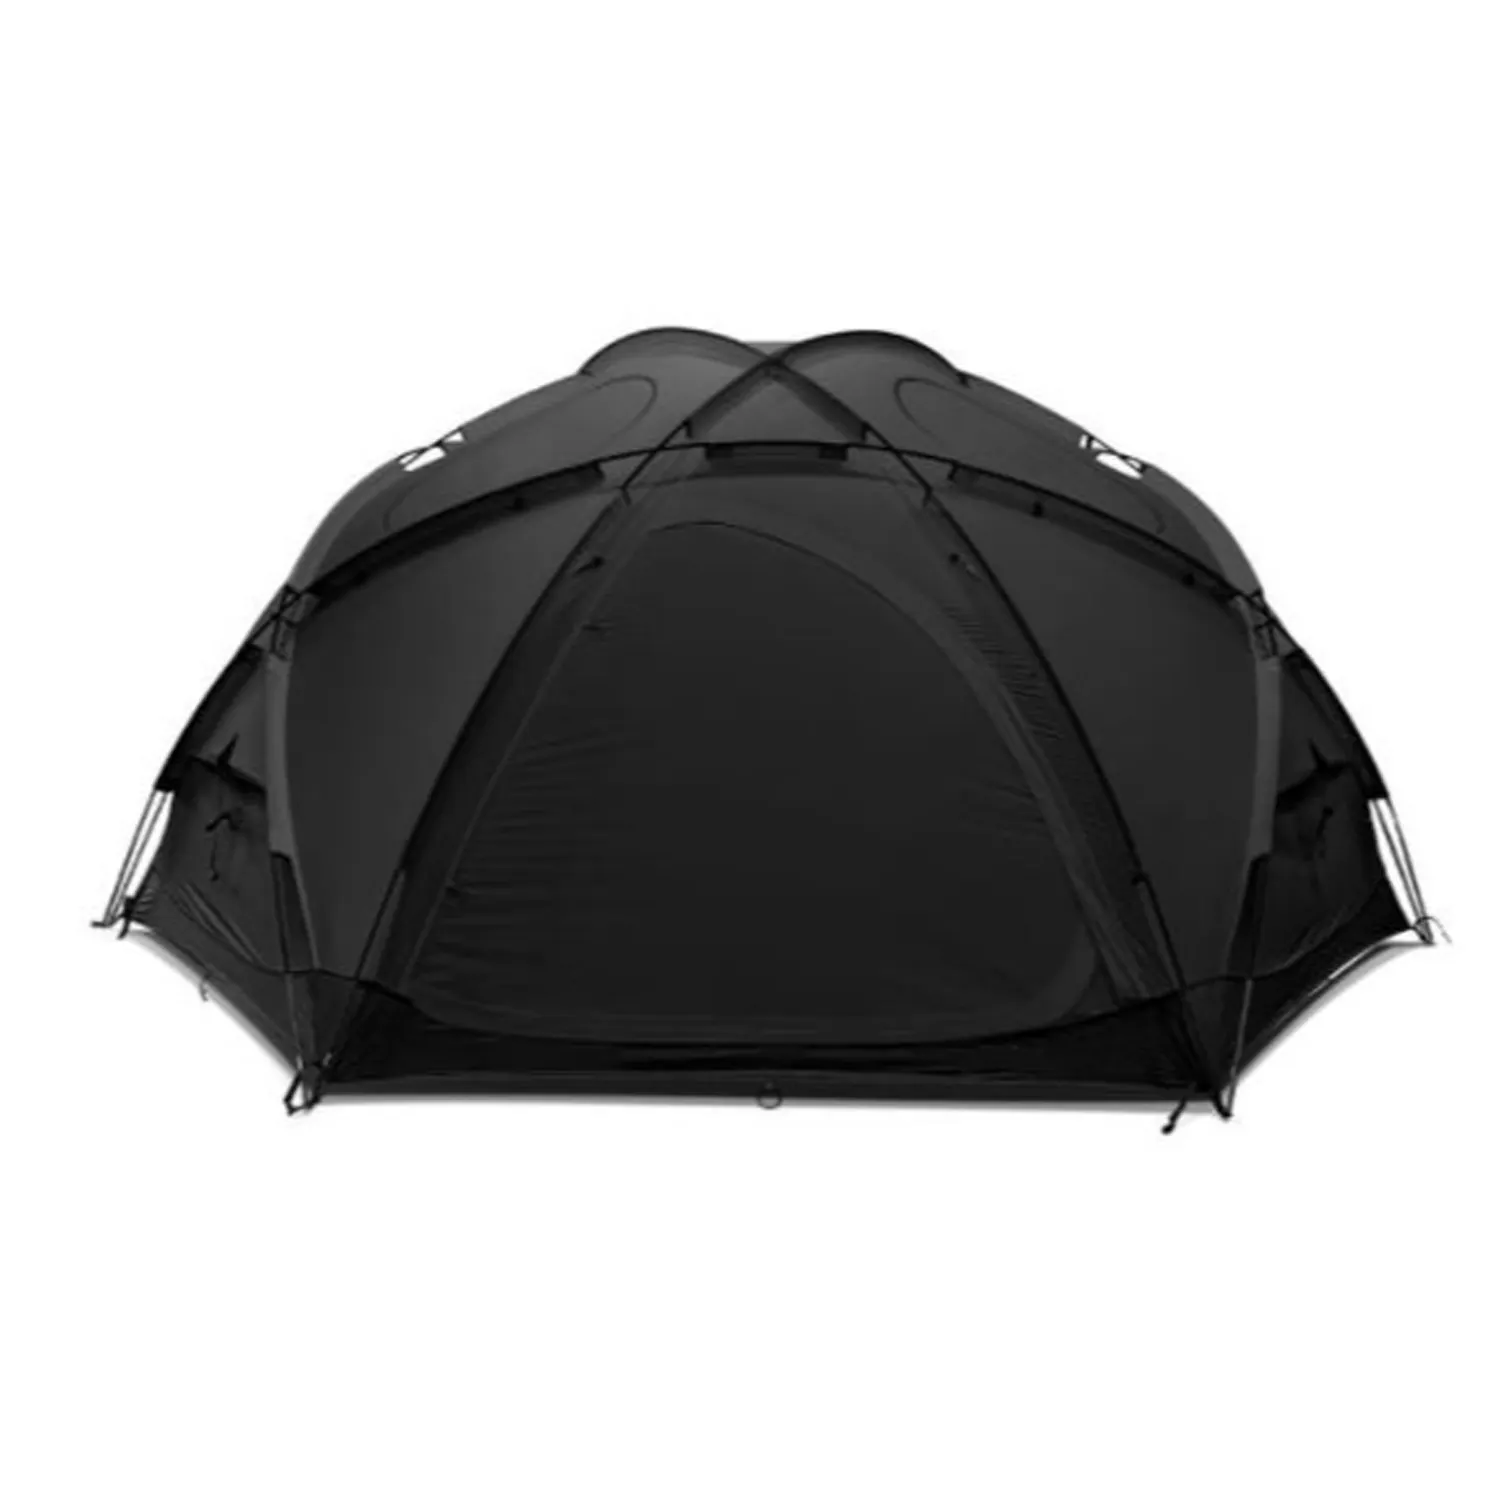 New Style Star Camping Dome Tent with Extended Vestibule Outdoor Hiking Ultralight Luxury Party Family Spherical Tent For Travel